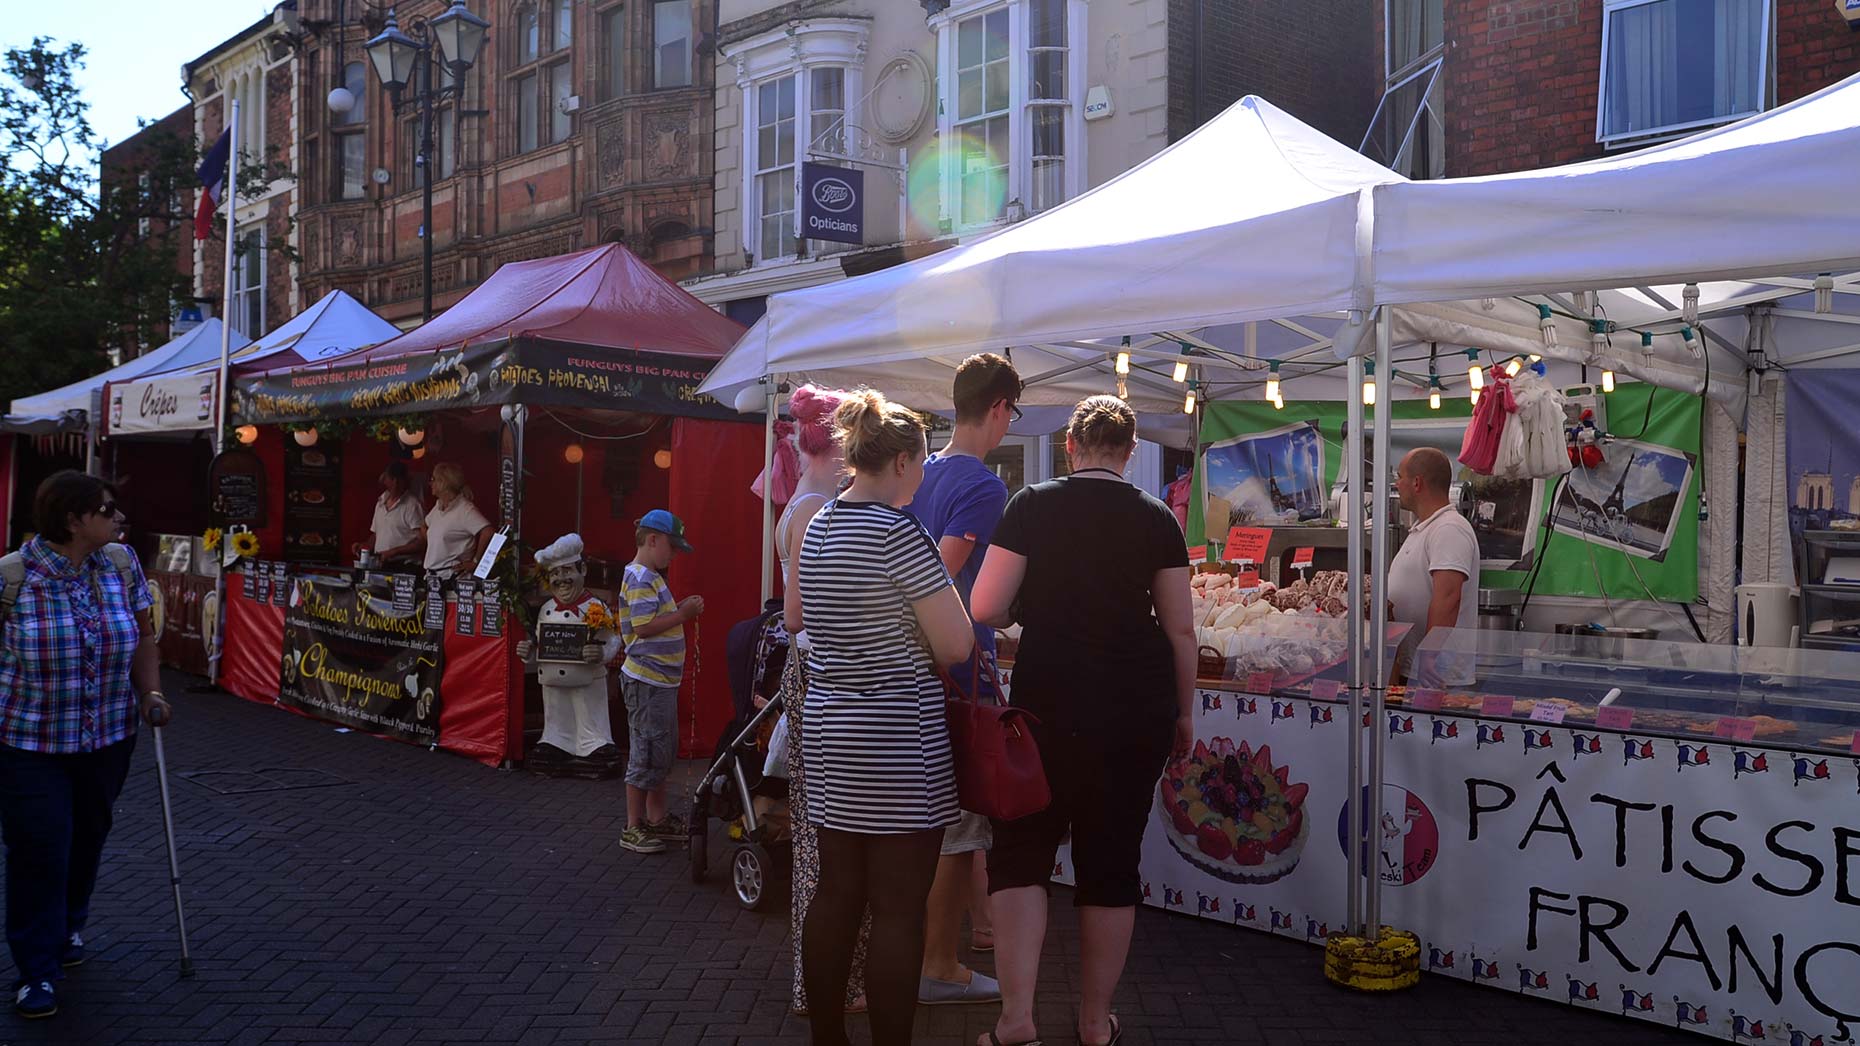 The Commonwealth Food Festival on the High Street. Photo: Steve Smailes for The Lincolnite